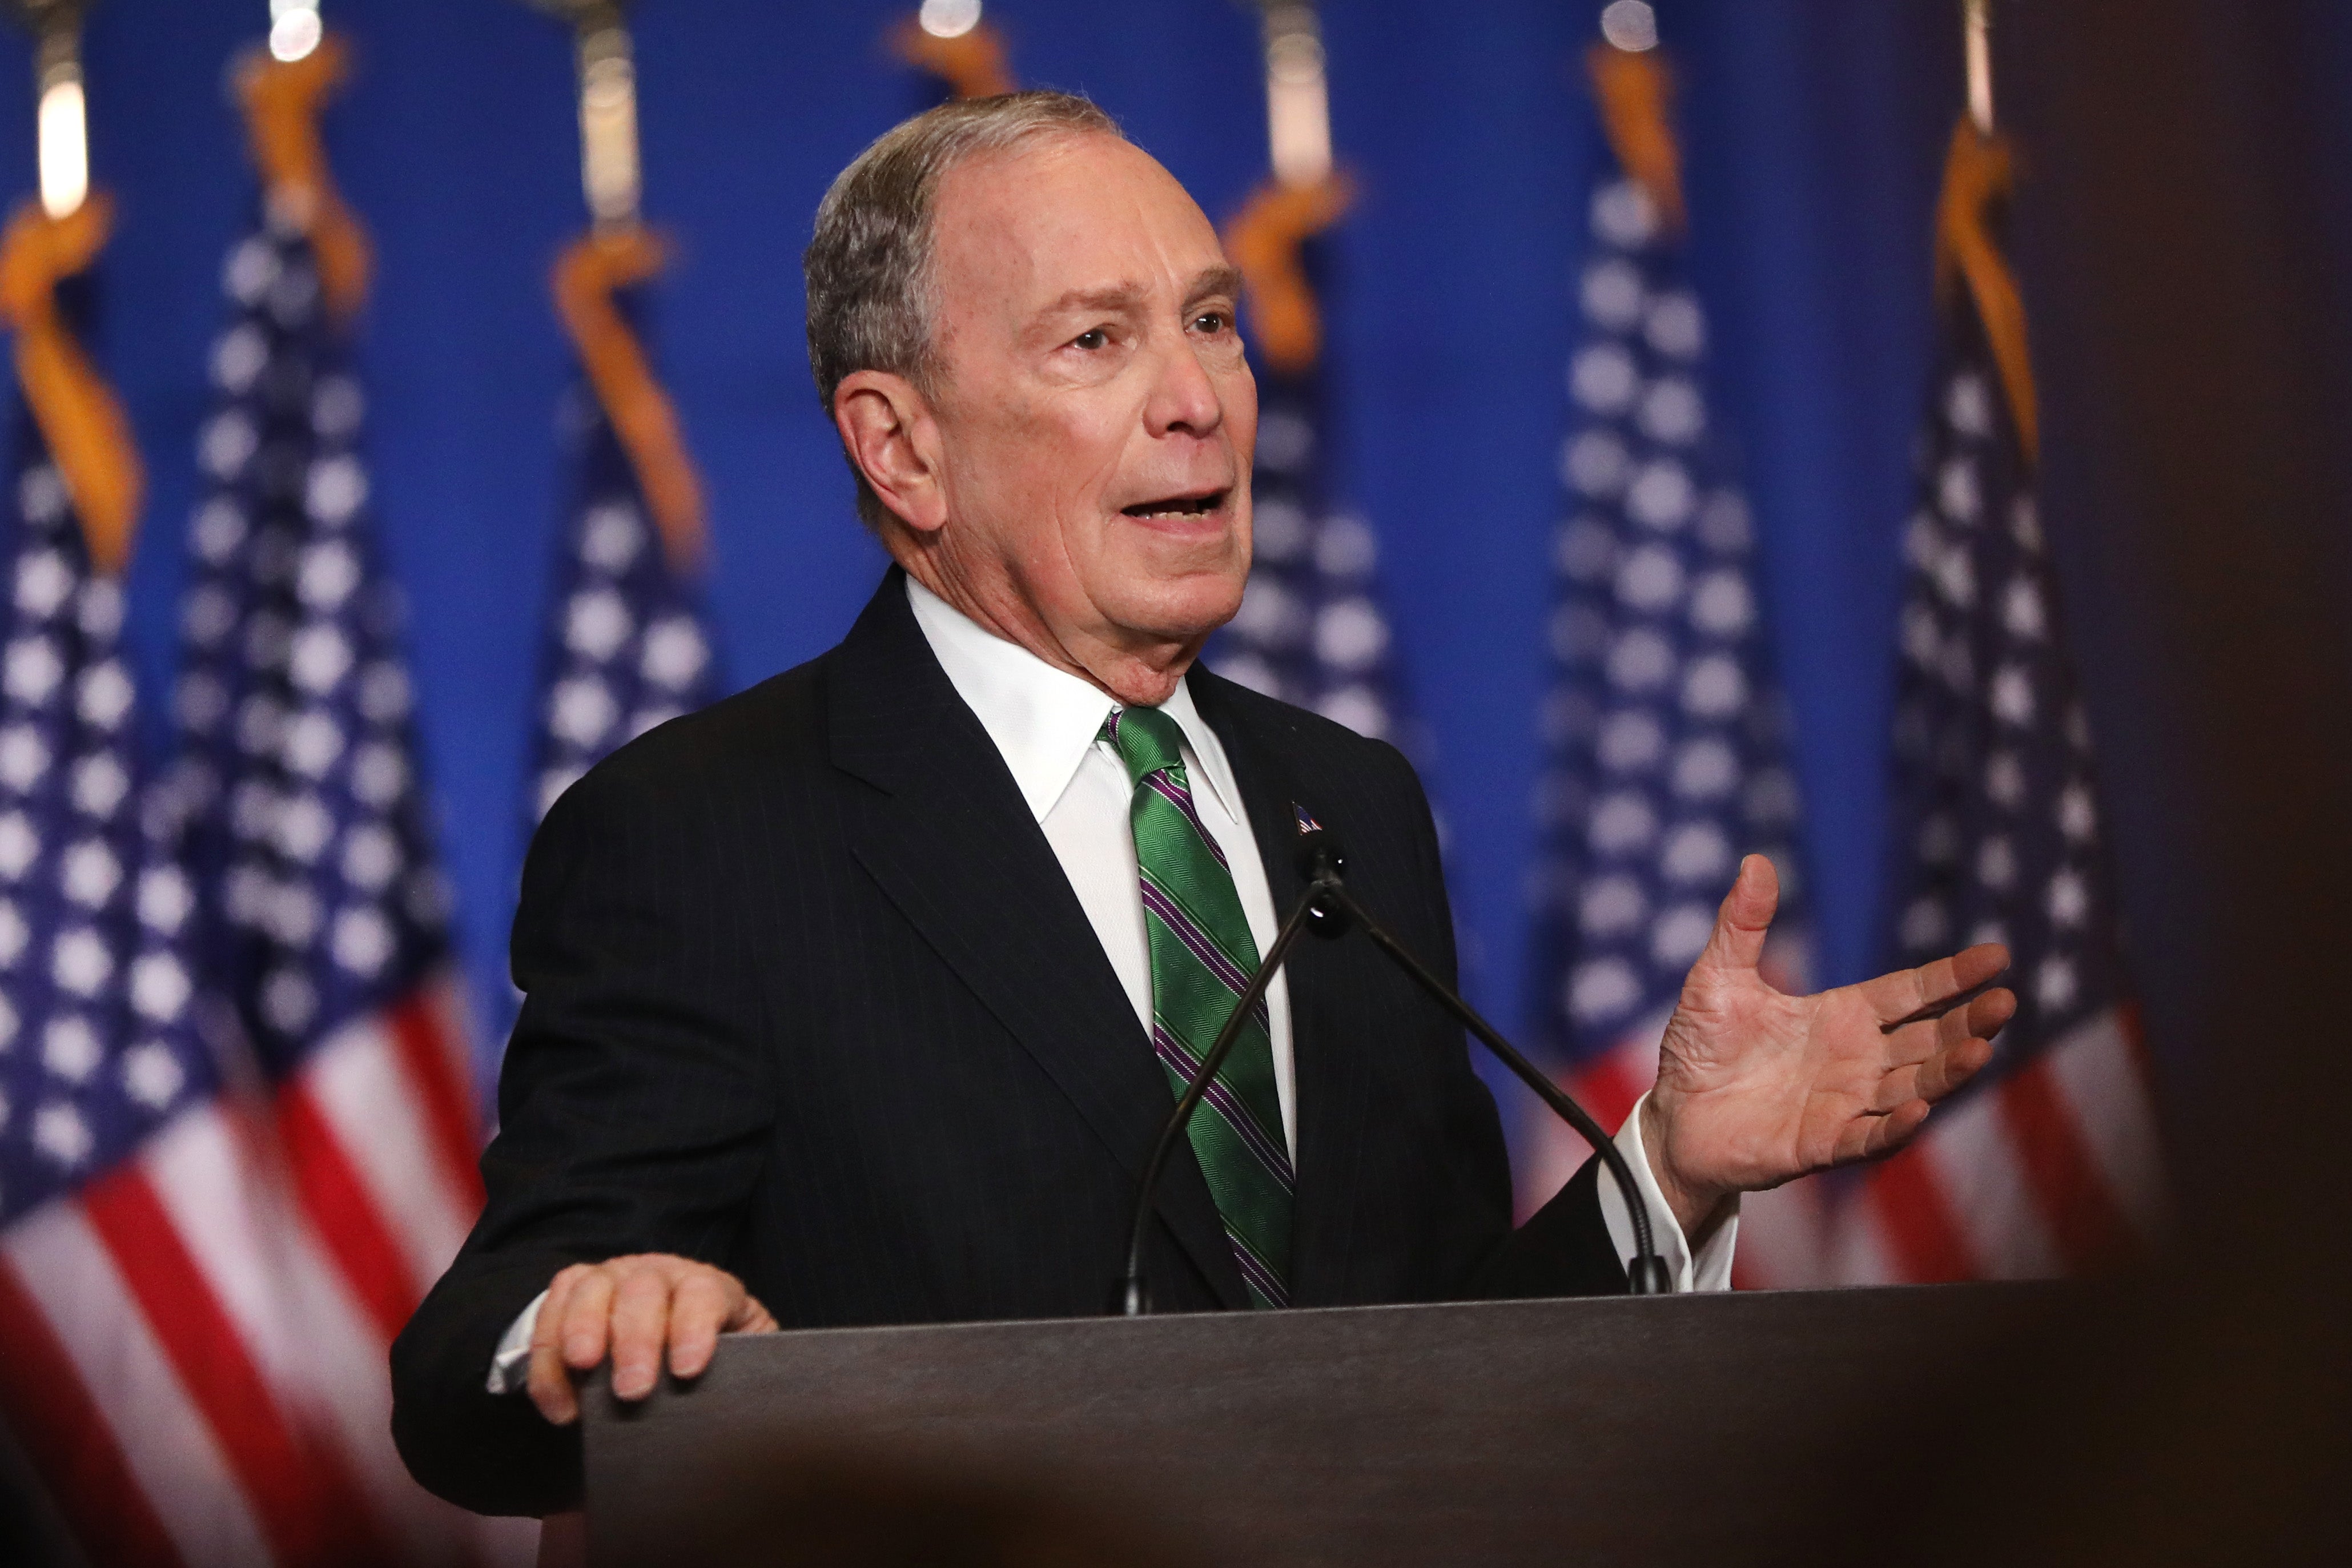 Mike Bloomberg has switched from blue to red with his political support